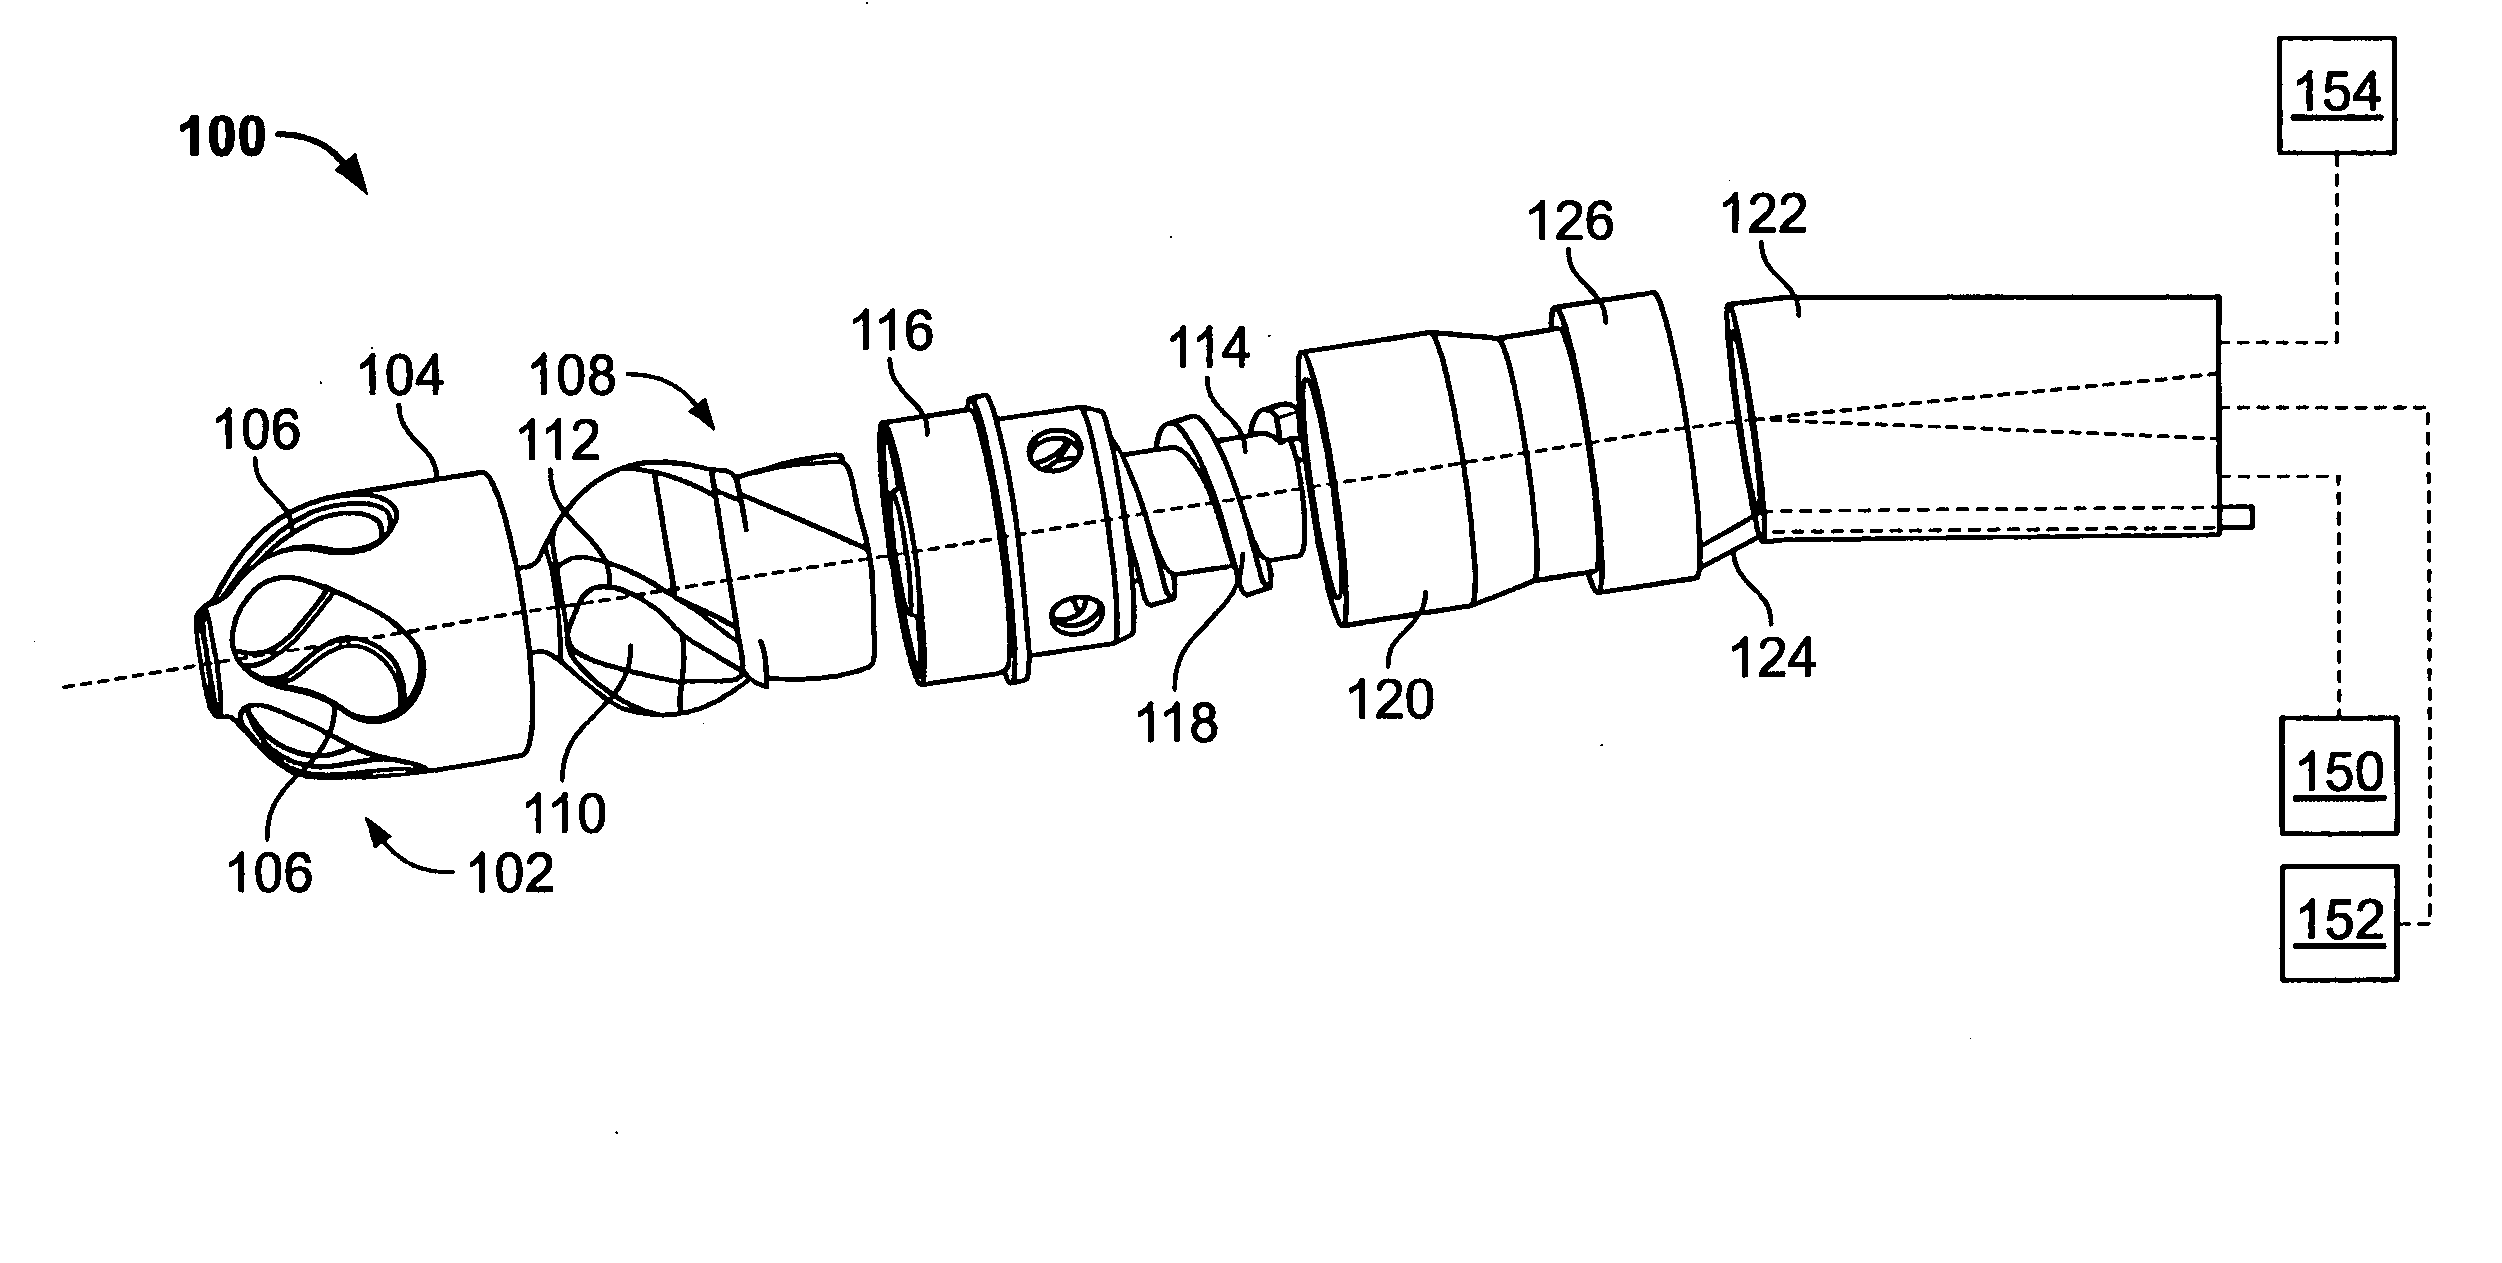 Devices, systems, and methods for cutting and removing occlusive material from a body lumen